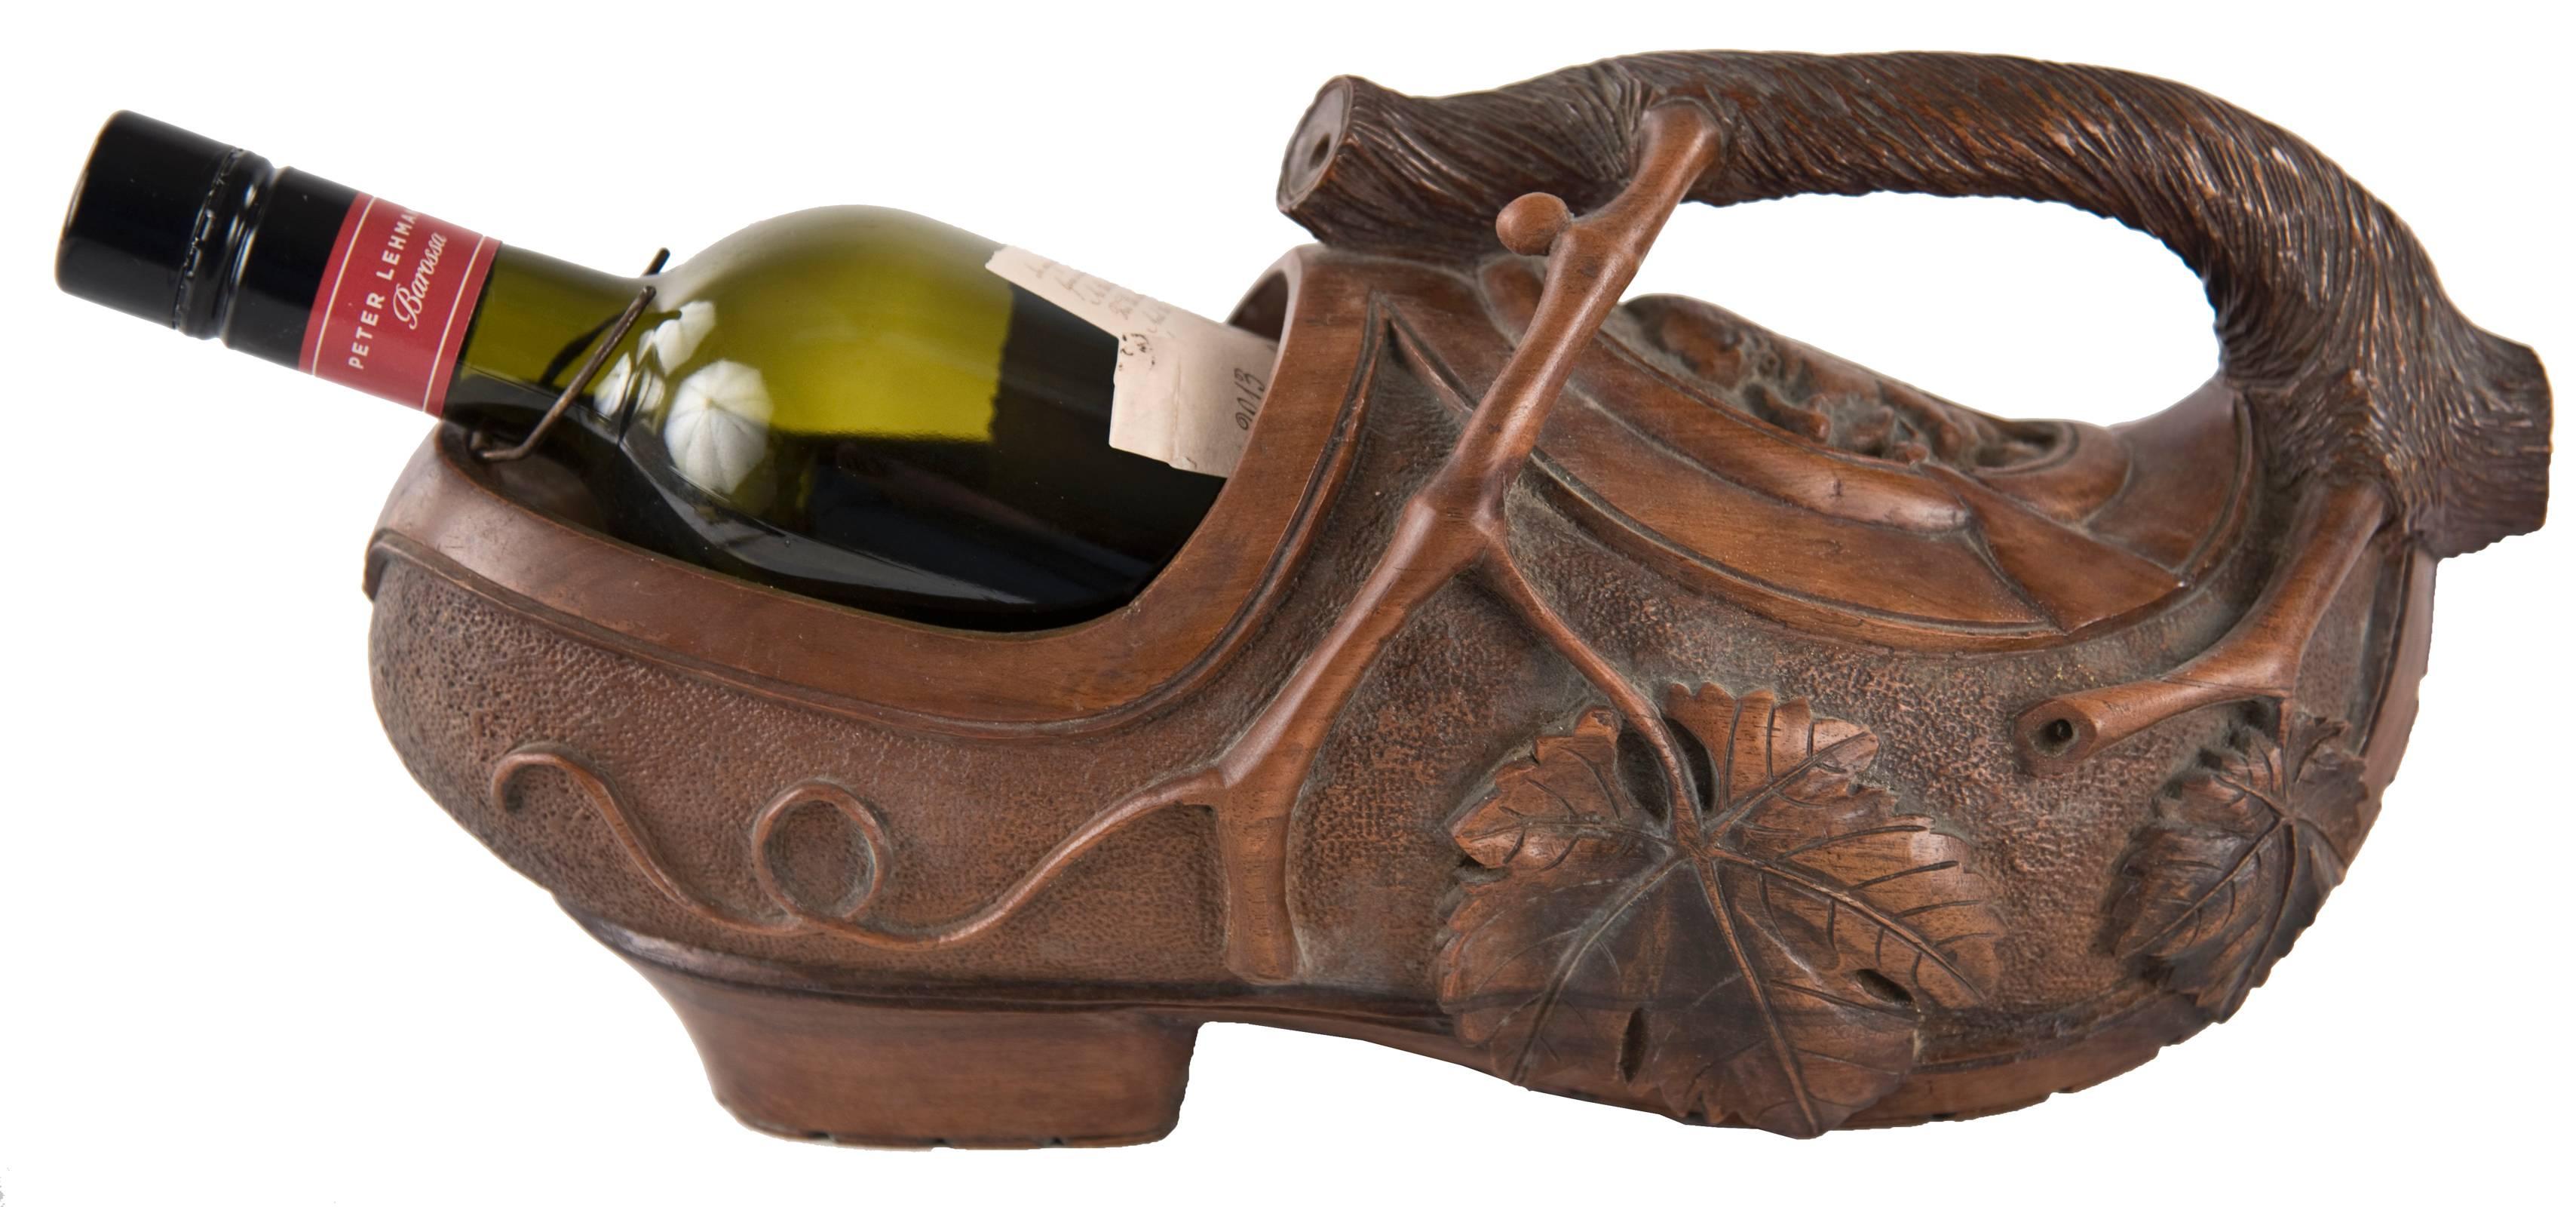 A carved wooden wine bottle holder in the form of a Dutch clog carved from a single piece of wood. Curling back from the toe is the thick stem of a grape vine from which branches, leaves and grape clusters hang, carved in high relief and against a